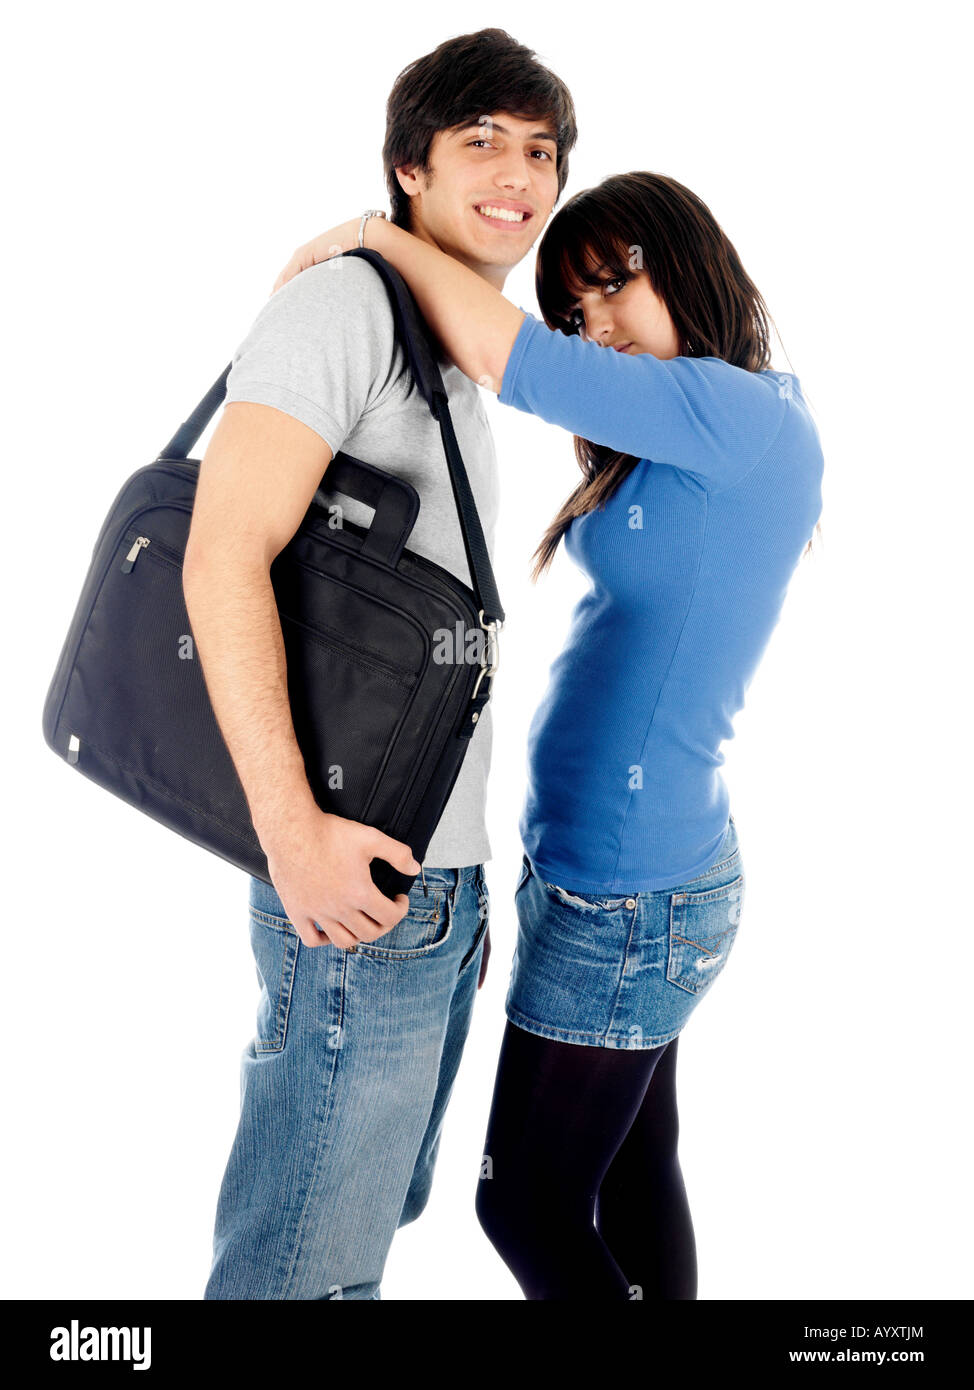 Young Teenage Student Couple Boy And Girl In A Serious College Relationship Isolated Against A White Background With A Clipping Path Stock Photo